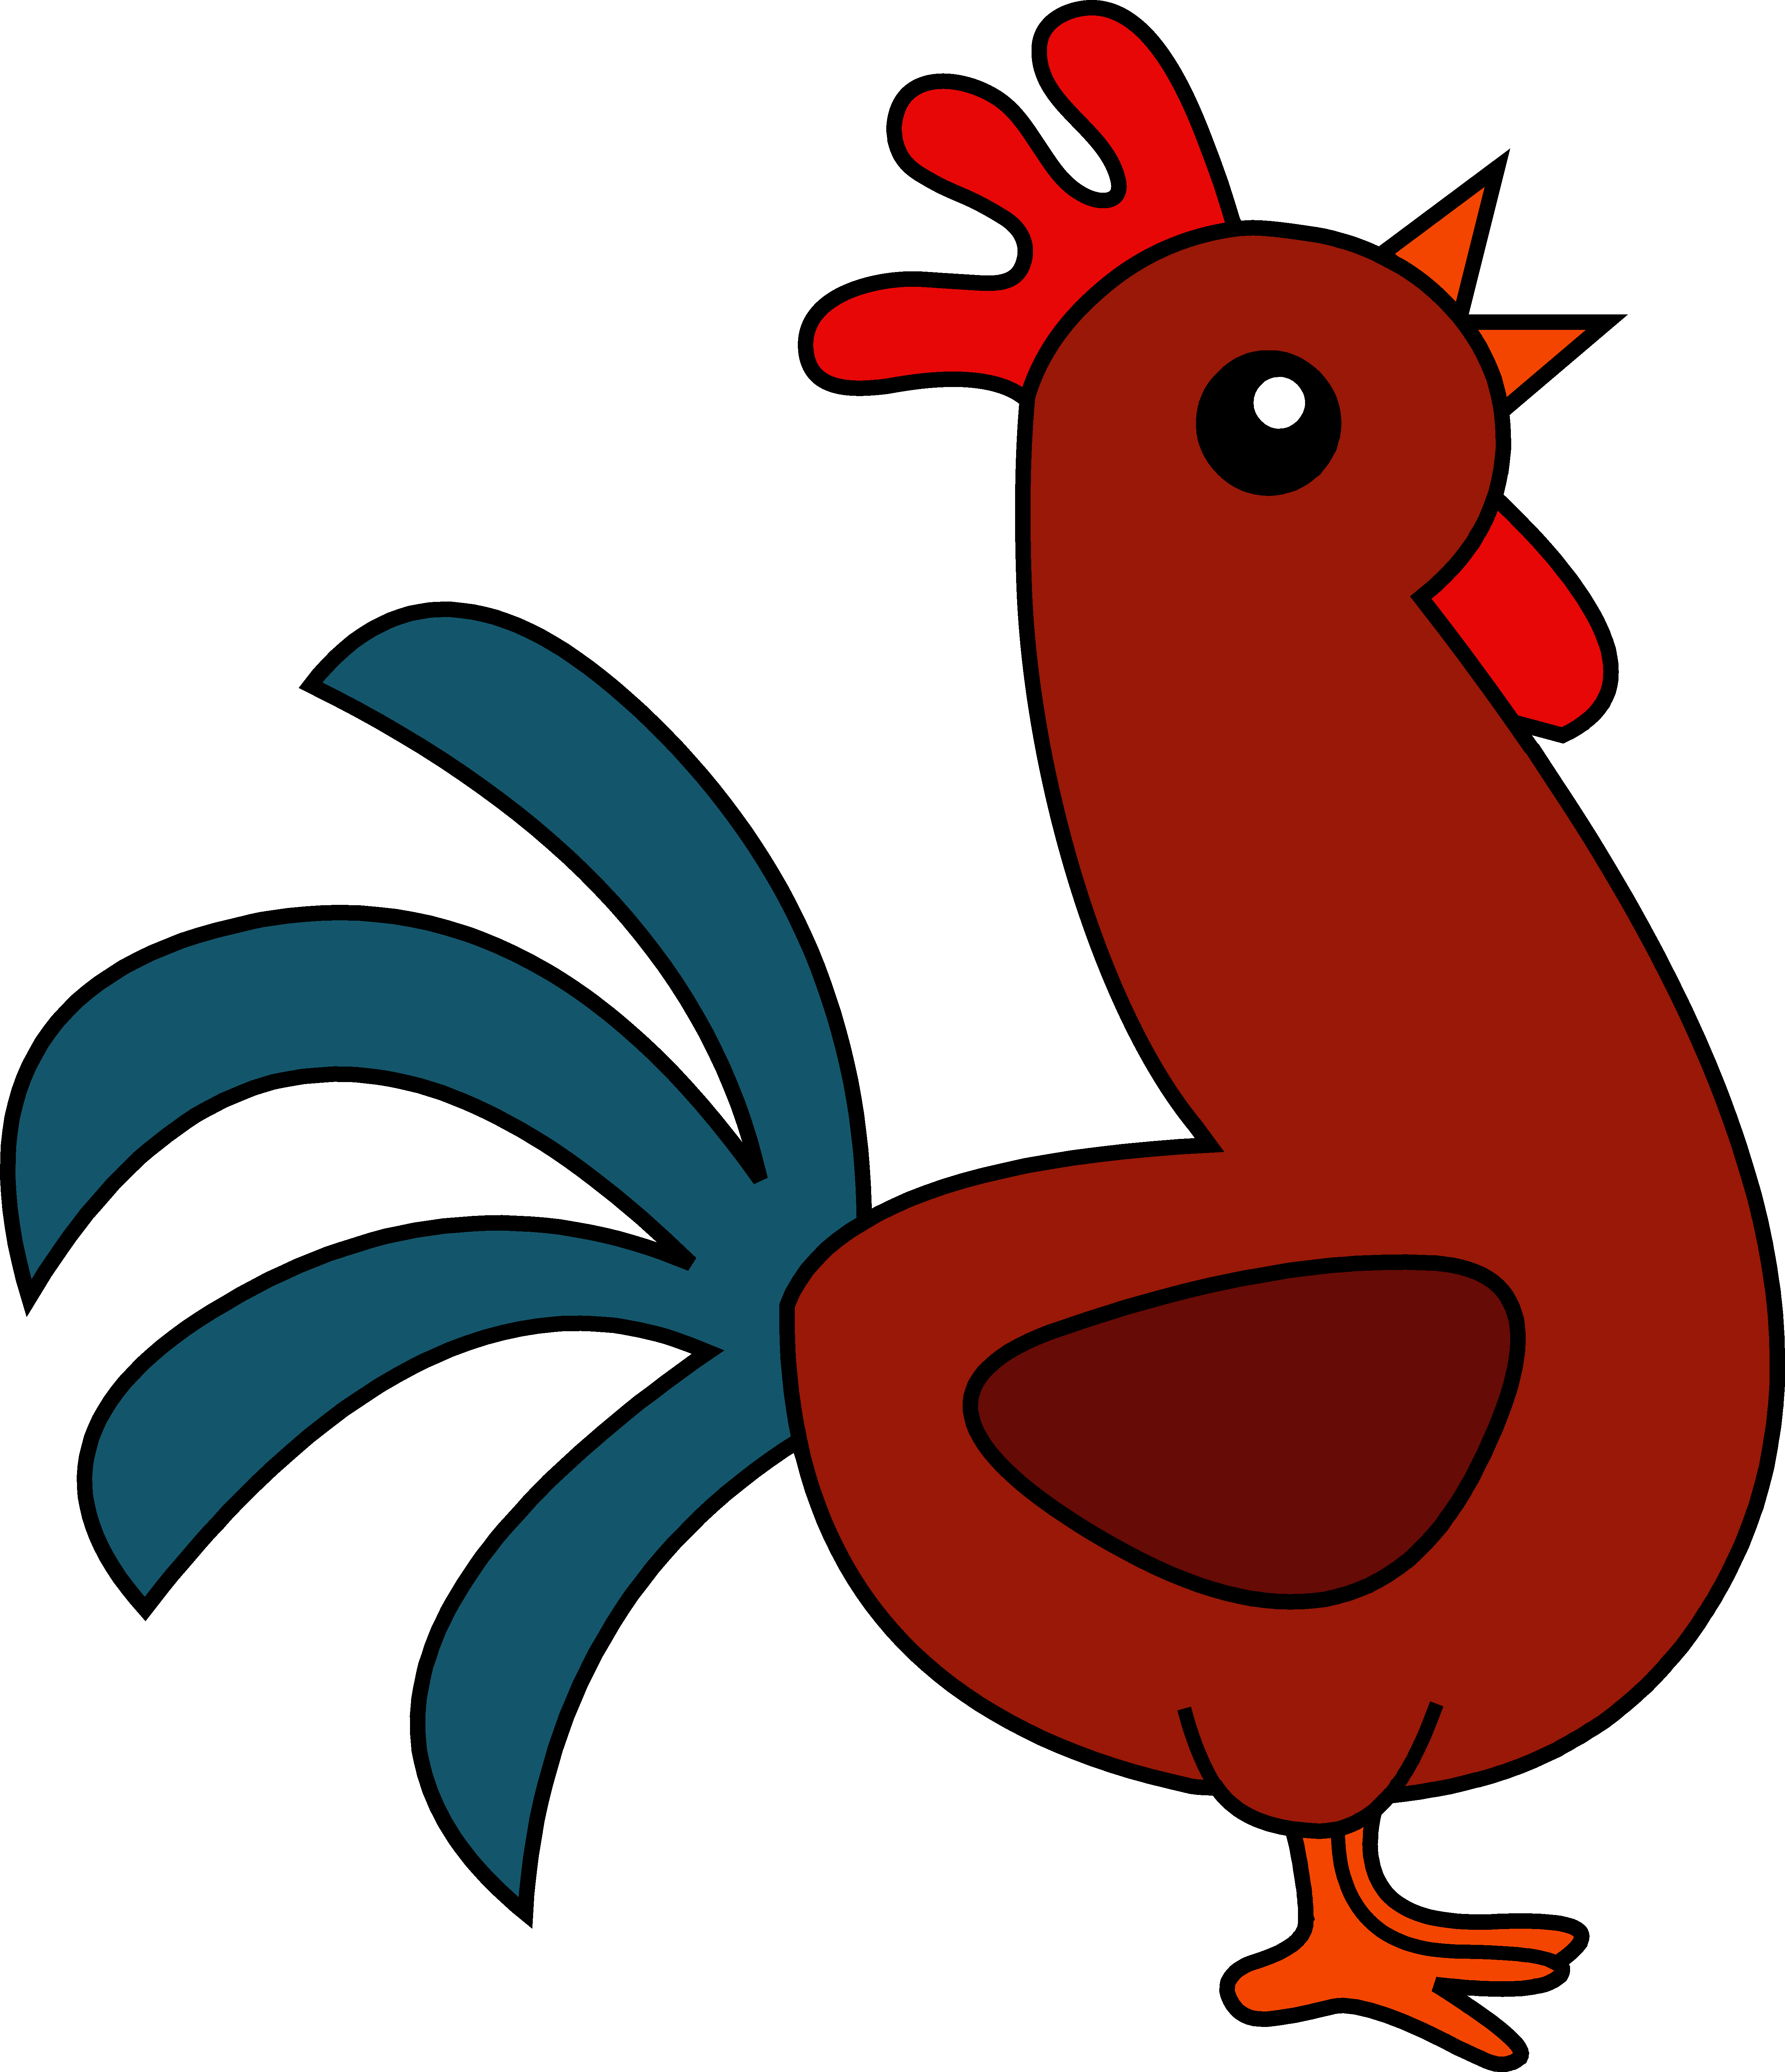 rooster crowing clipart free - photo #26